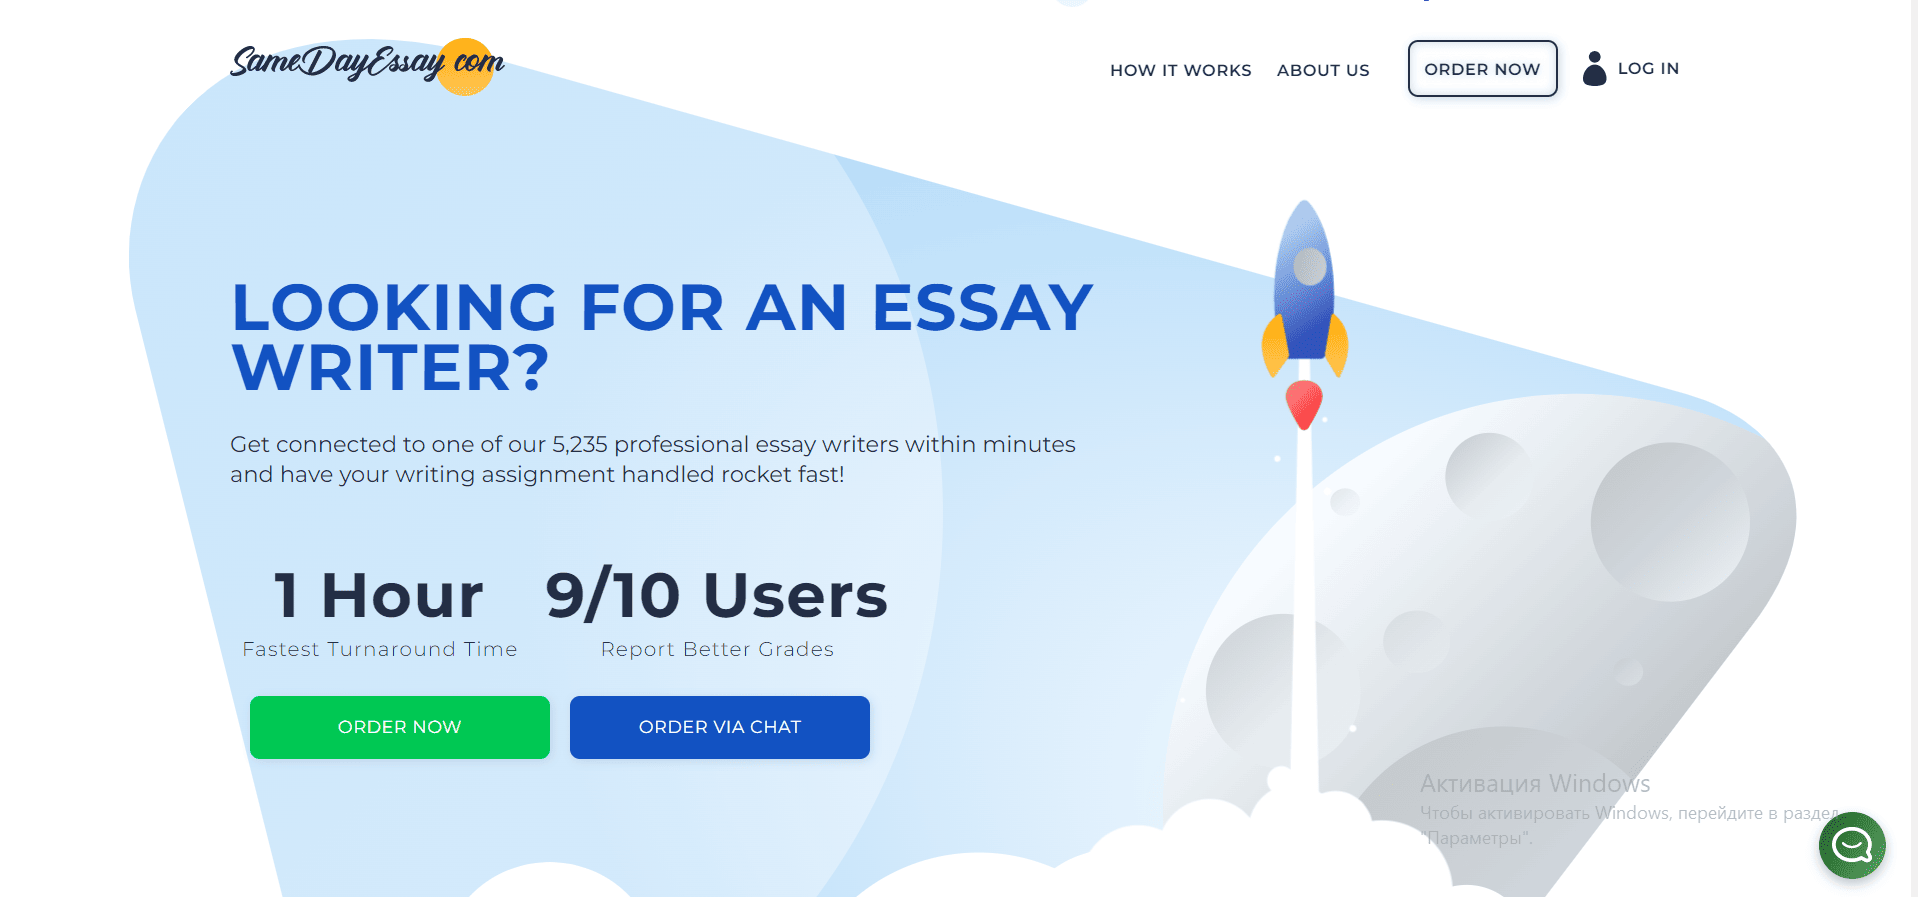 Samedayessay.com – What I Think About It | Student’s Review